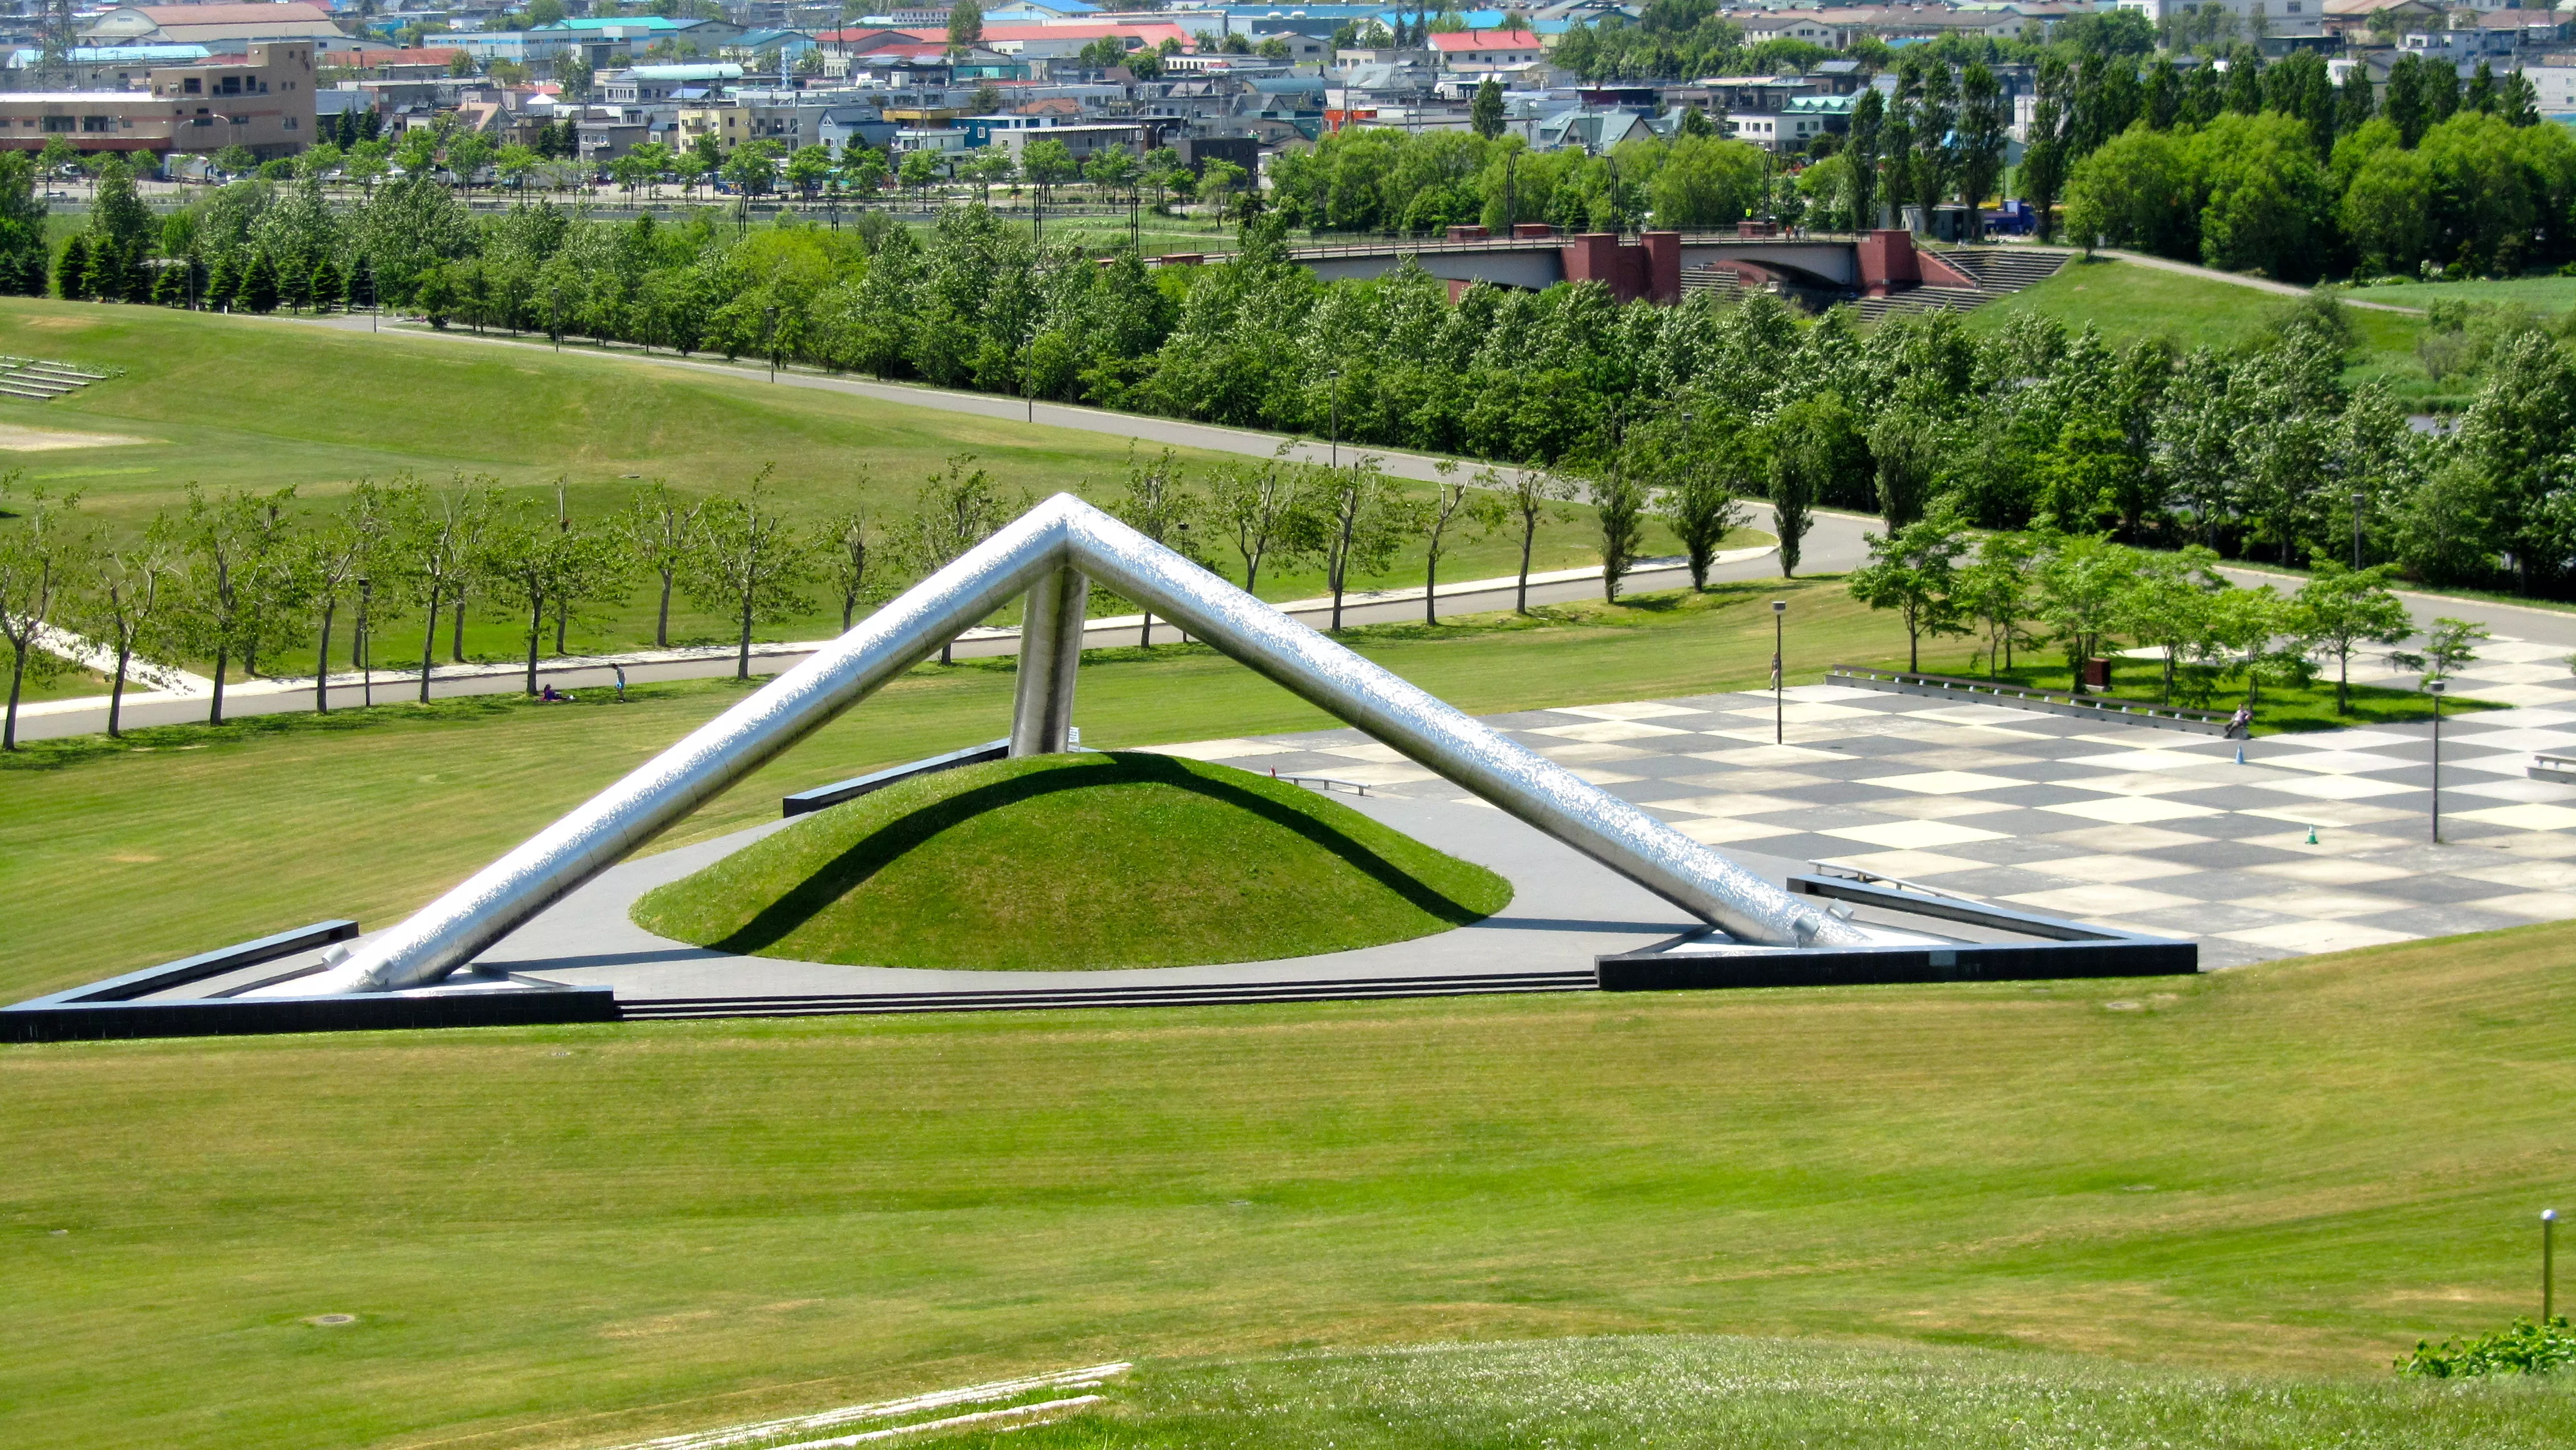 Moerenuma Park in Japan, East Asia | Parks,Playgrounds - Rated 4.9